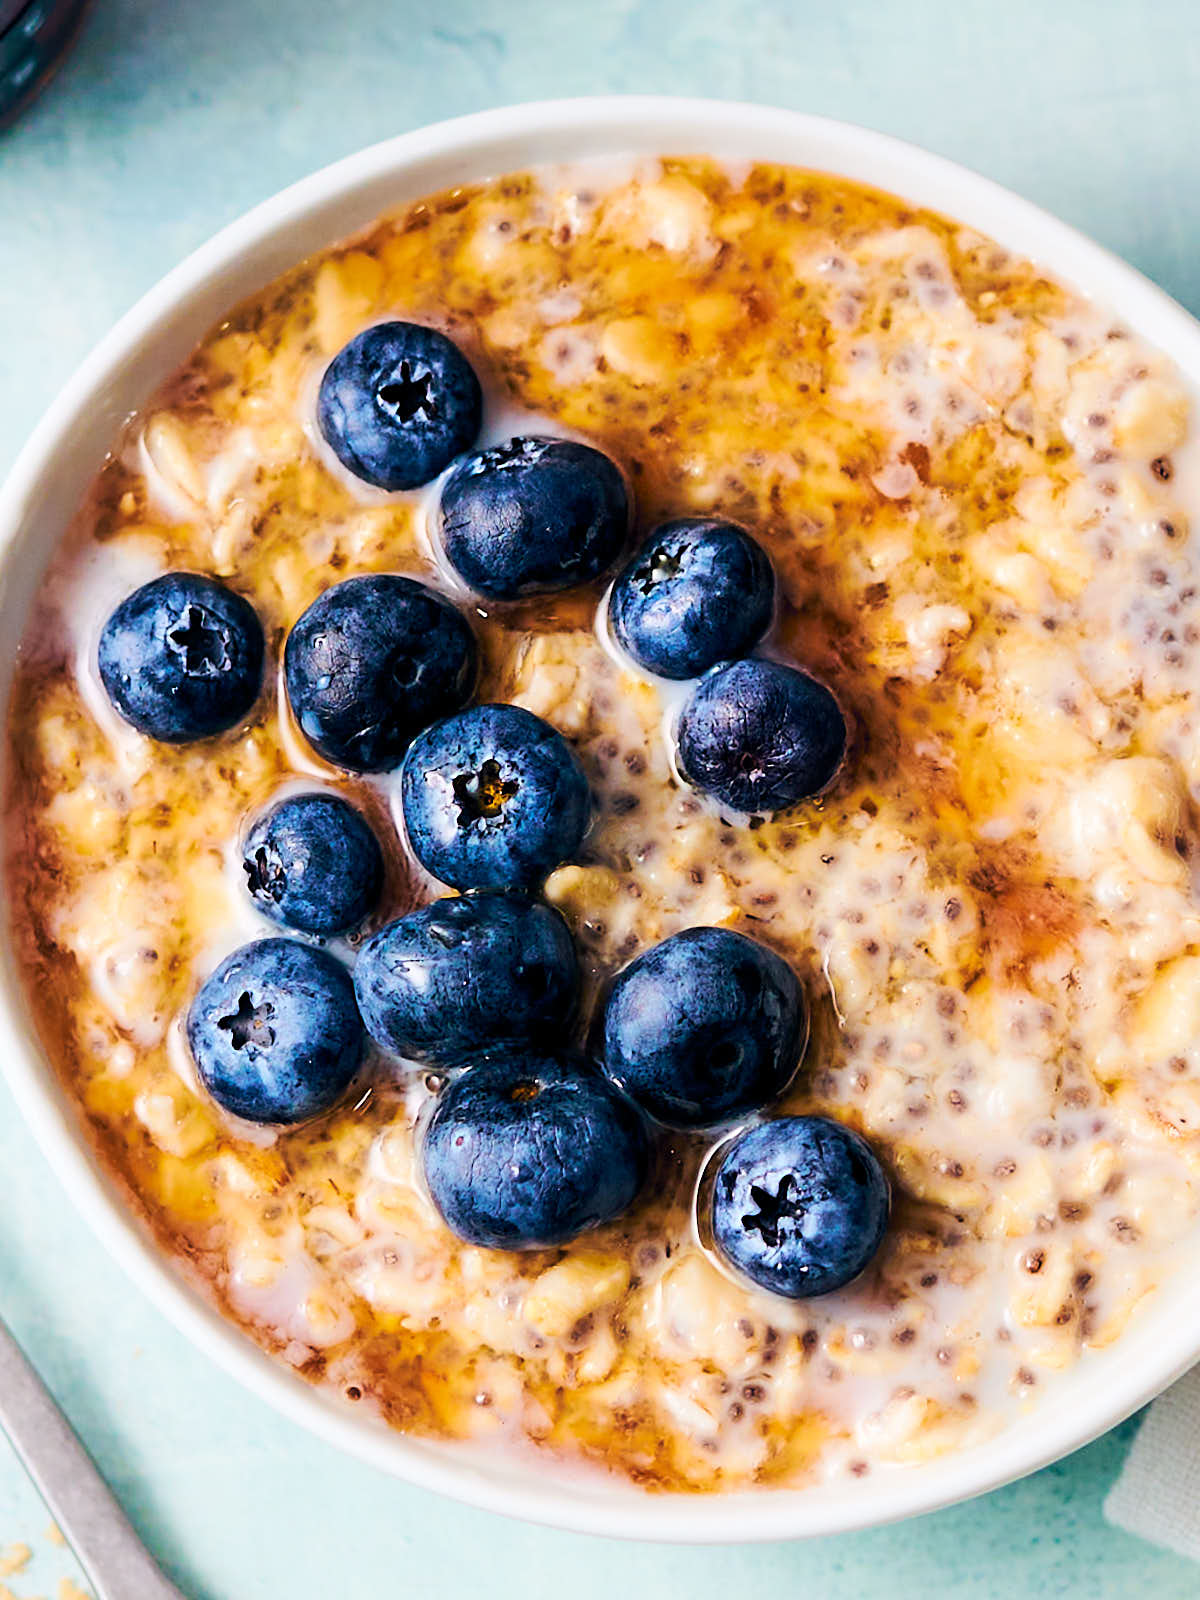 Homemade maple syrup alternative on a bowl of overnight oats with blueberries.